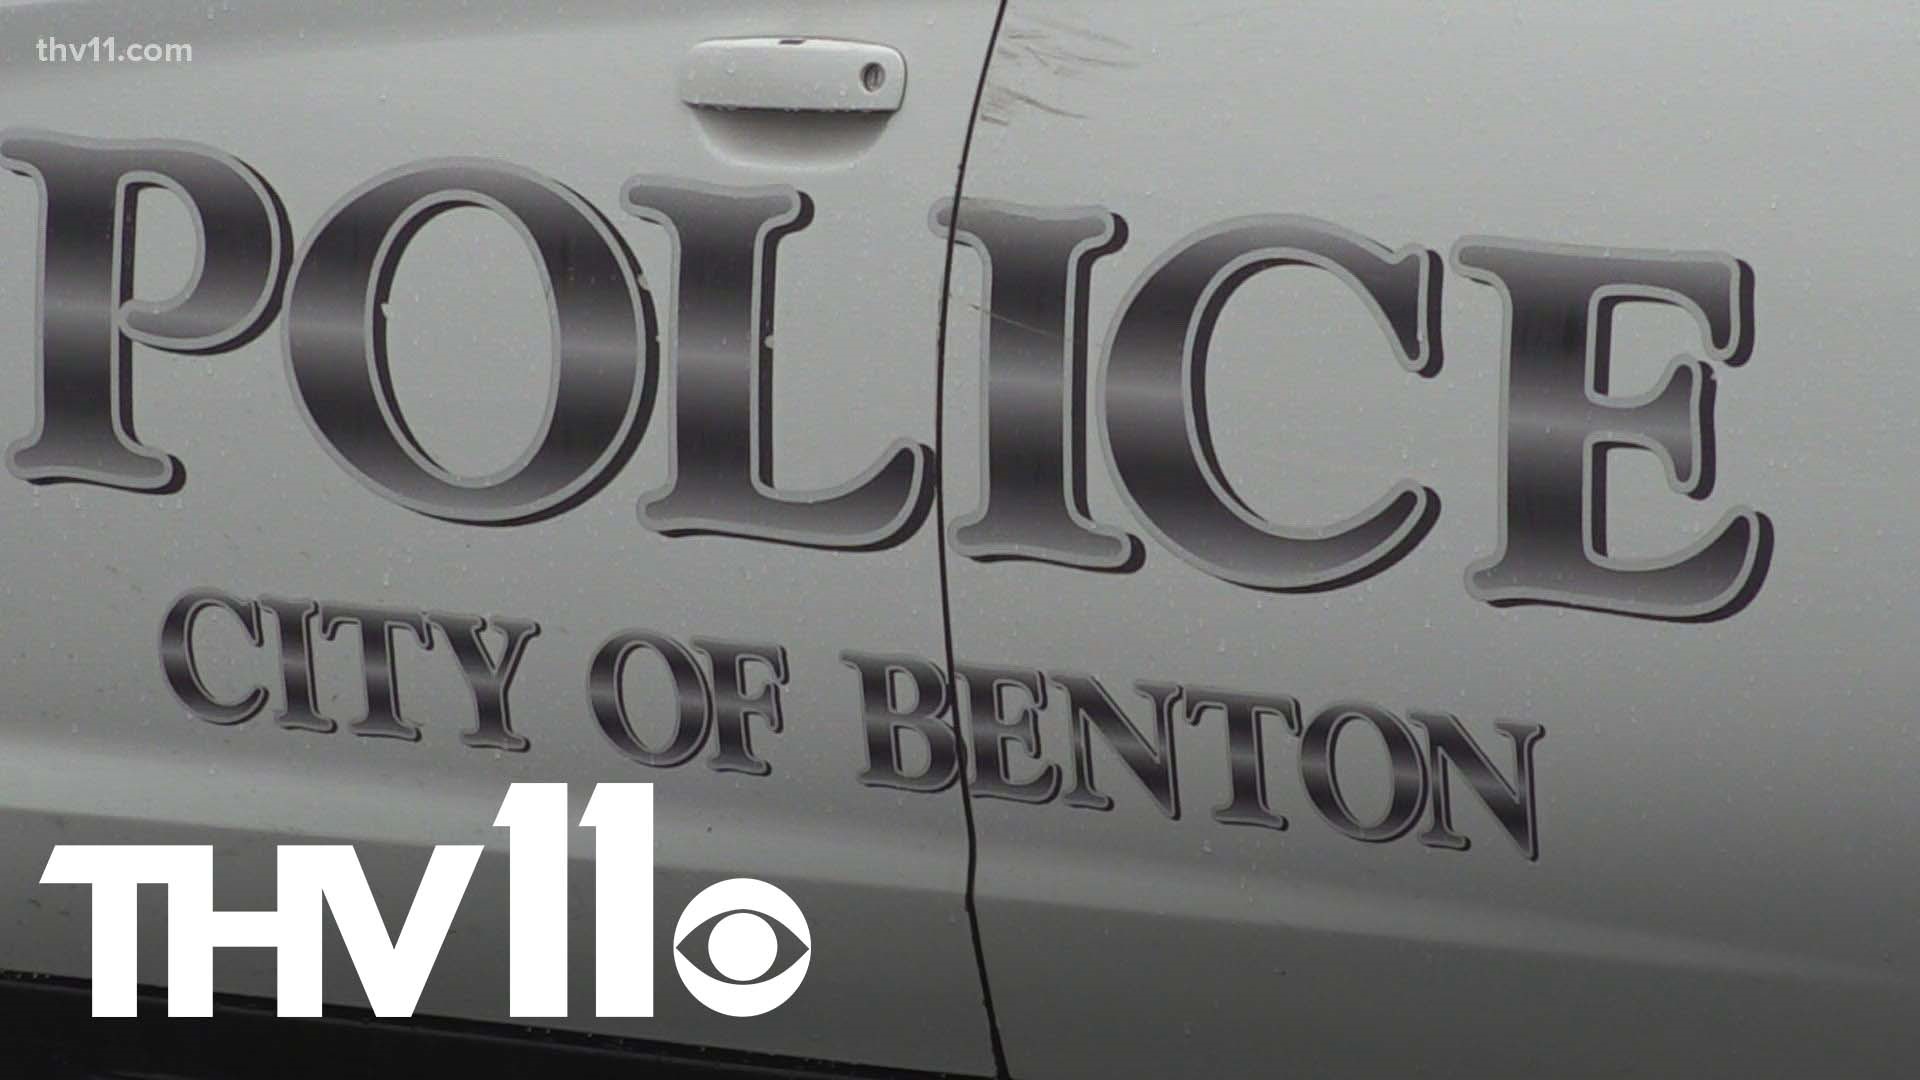 Marijuana restrictions for the Benton Police Department were eased on Wednesday, as the group works to fill officer vacancies.